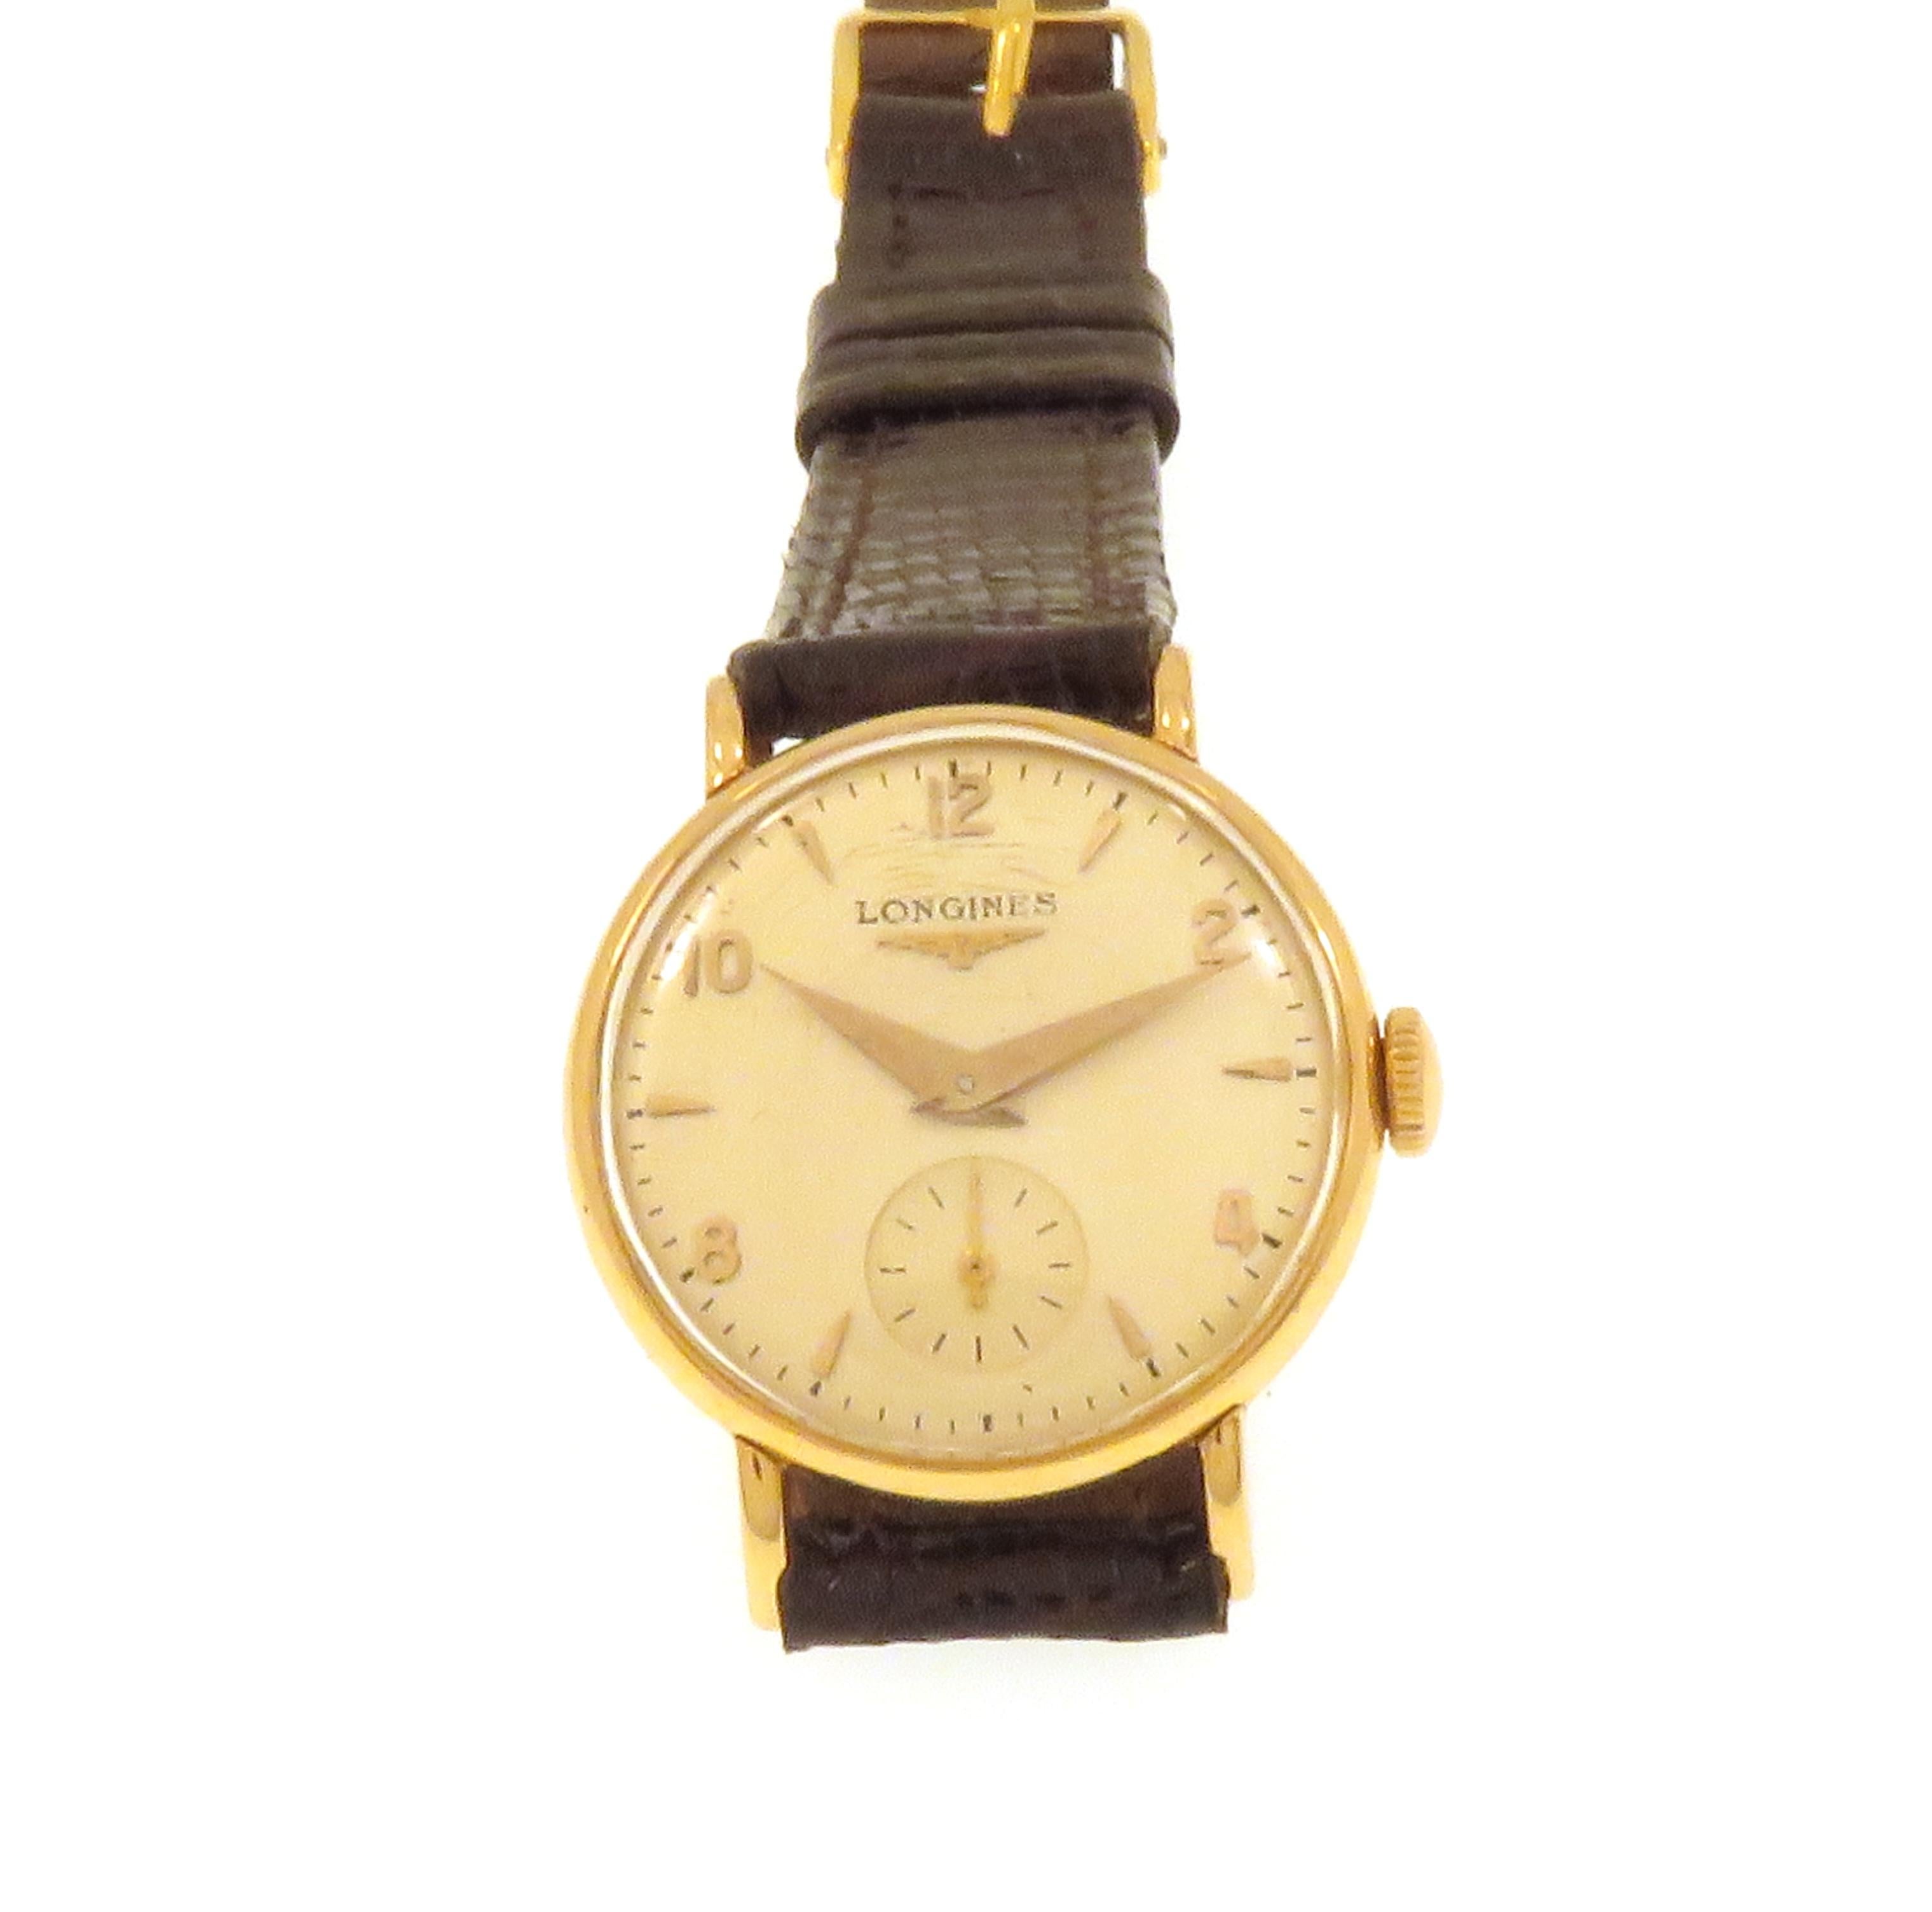 Orologio Vintage Longines anni '40 con i secondi alle ore 6. Movimento a carica manuale cassa mm 24 in oro 18k. The plastic glass is marked as can be clearly seen in the photos. Leather strap with gold-plated clasp. Total weight 16.0 grams.